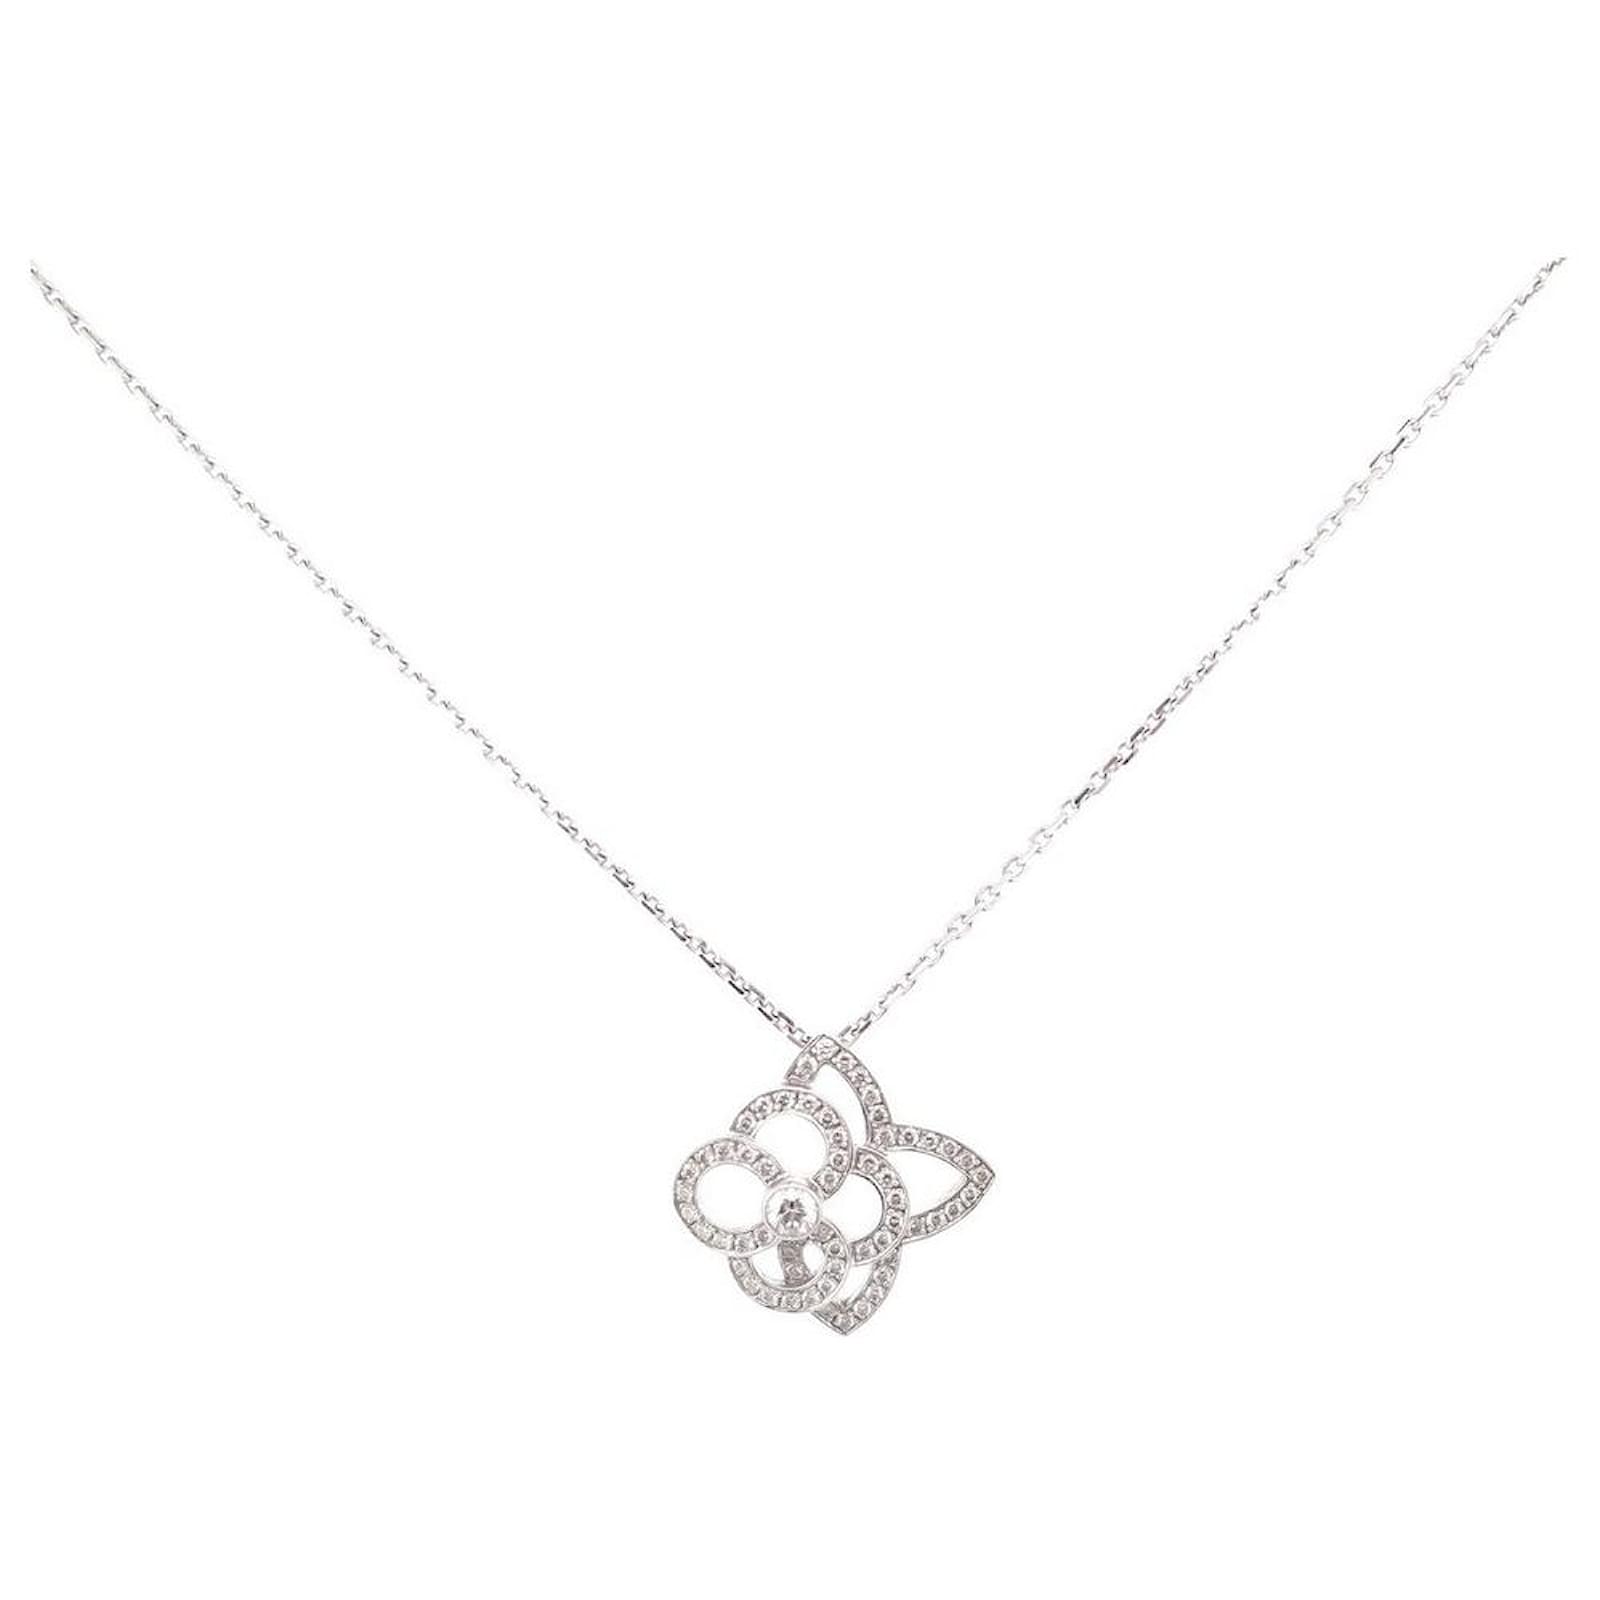 Louis Vuitton Color Blossom Neglige Necklace, White Gold And